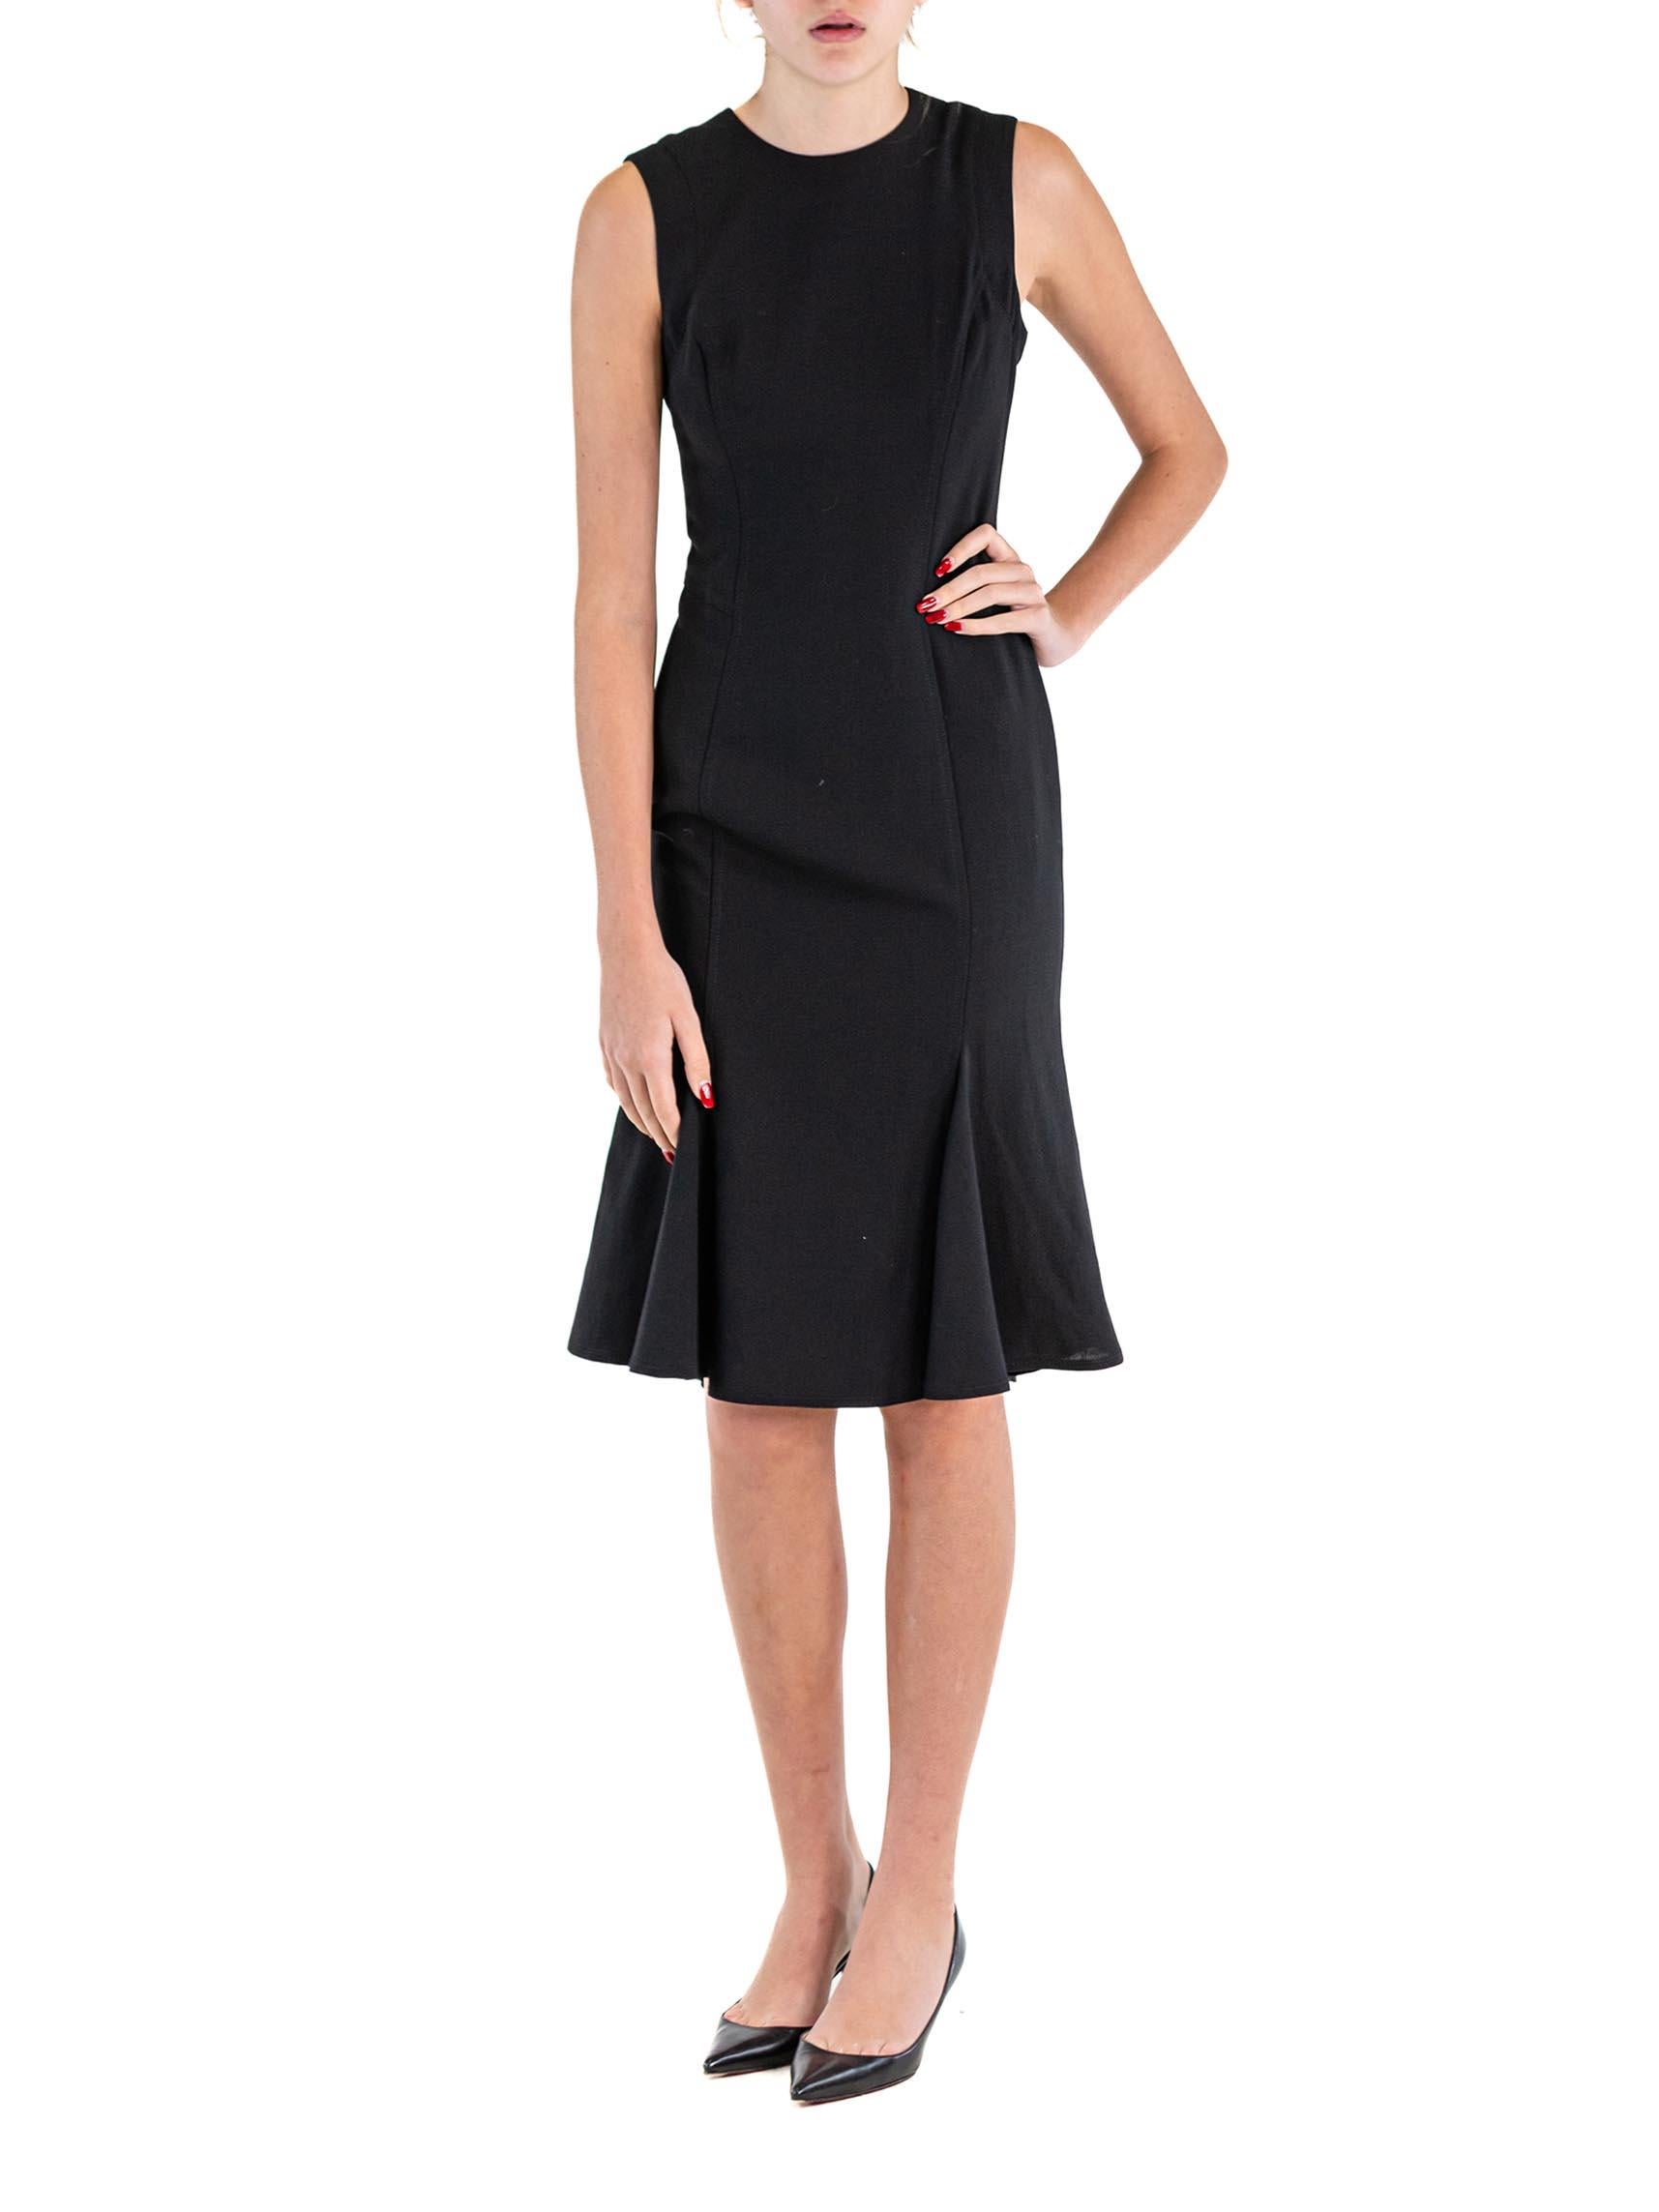 1990S GIANNI VERSACE Black Wool Crepe Dress With Fluted Hem For Sale 1